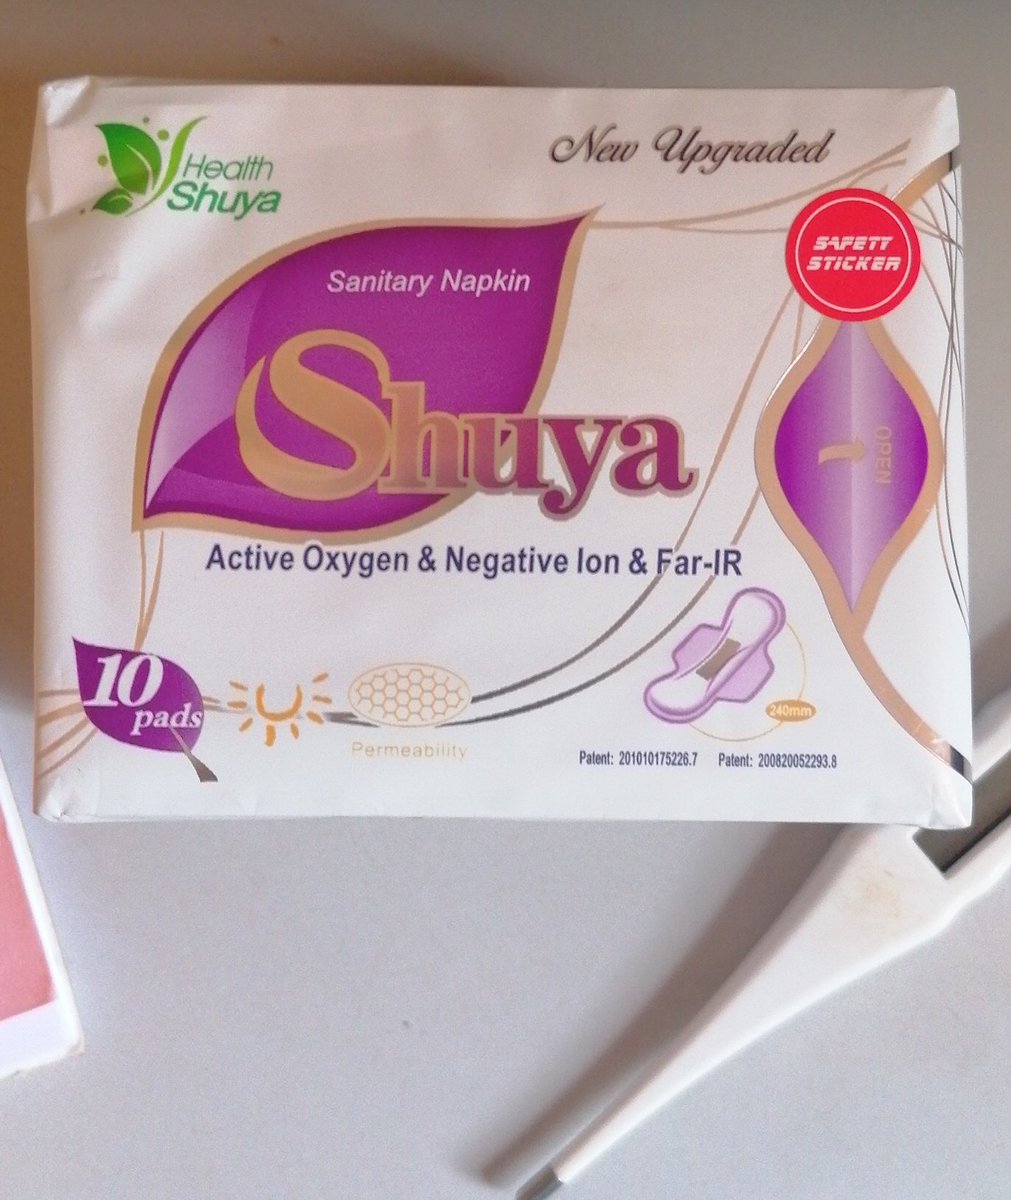 During menstruation, the genital immunity slightly lowers, hence susceptible to genital infections,
Grab @shuya_pads that provides a vaginal selftesting kit, includes anion chip that effectively enhances antibacterial action, leak free, and Pantyliners
#femininehealth
#shuyapads